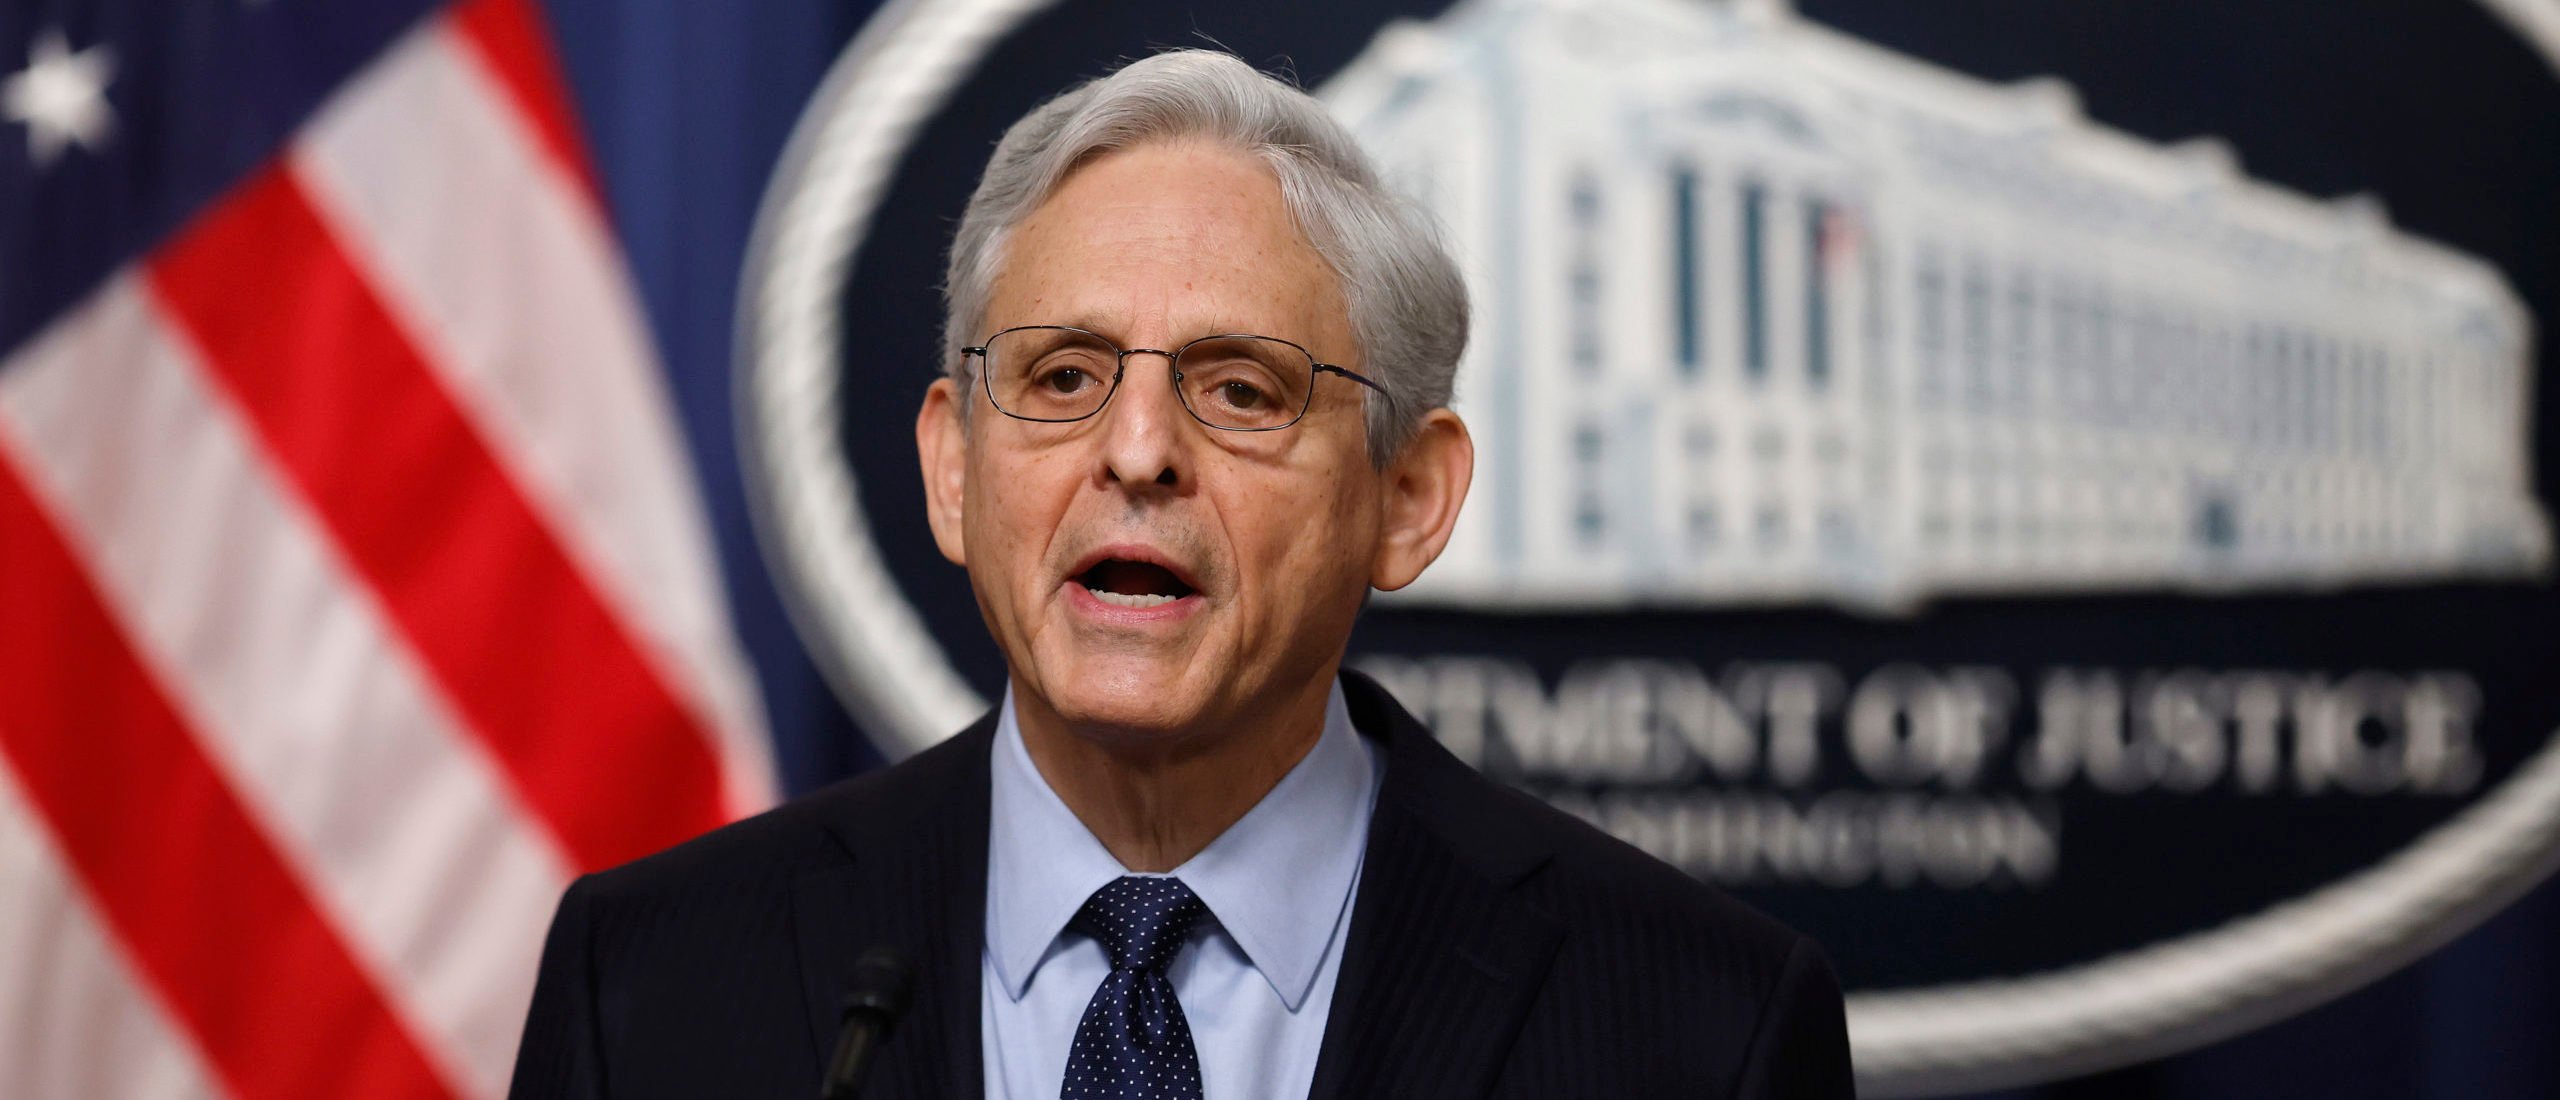 House Passes Resolution To Hold Attorney General Merrick Garland In Contempt